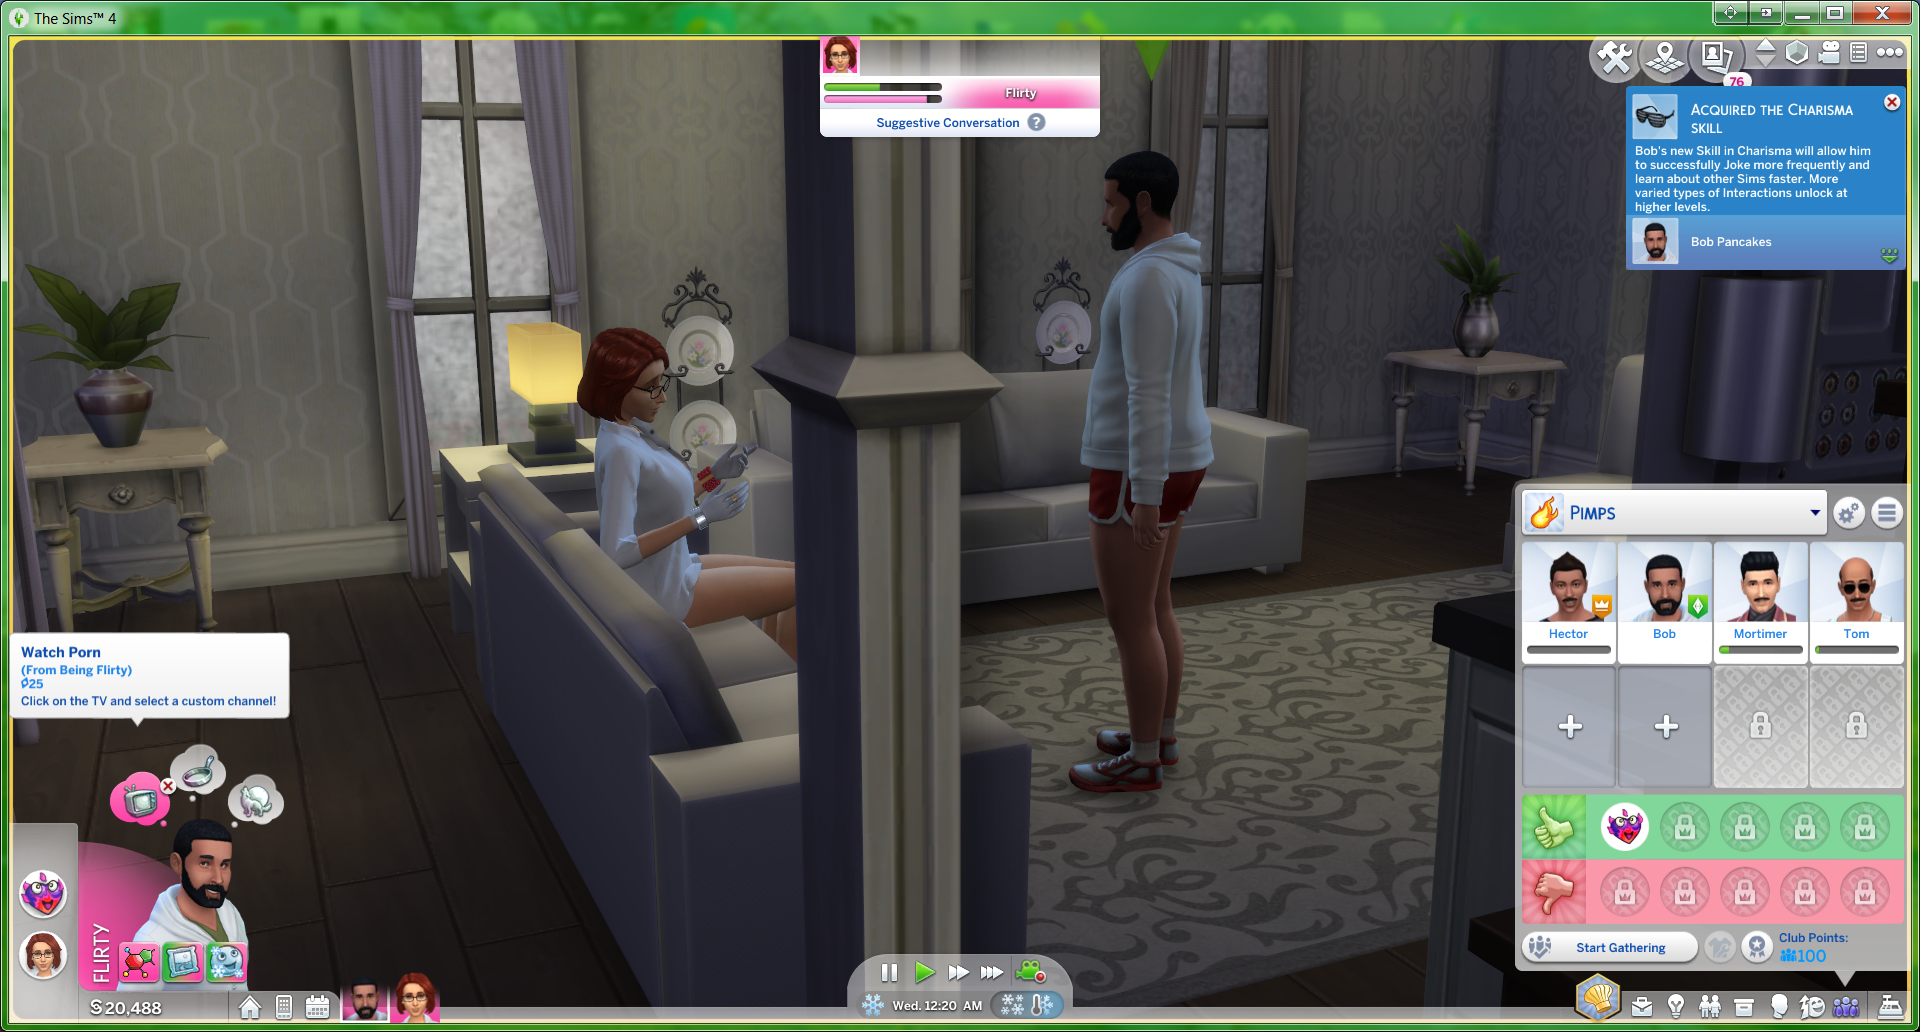 Sims movie things happen while watching